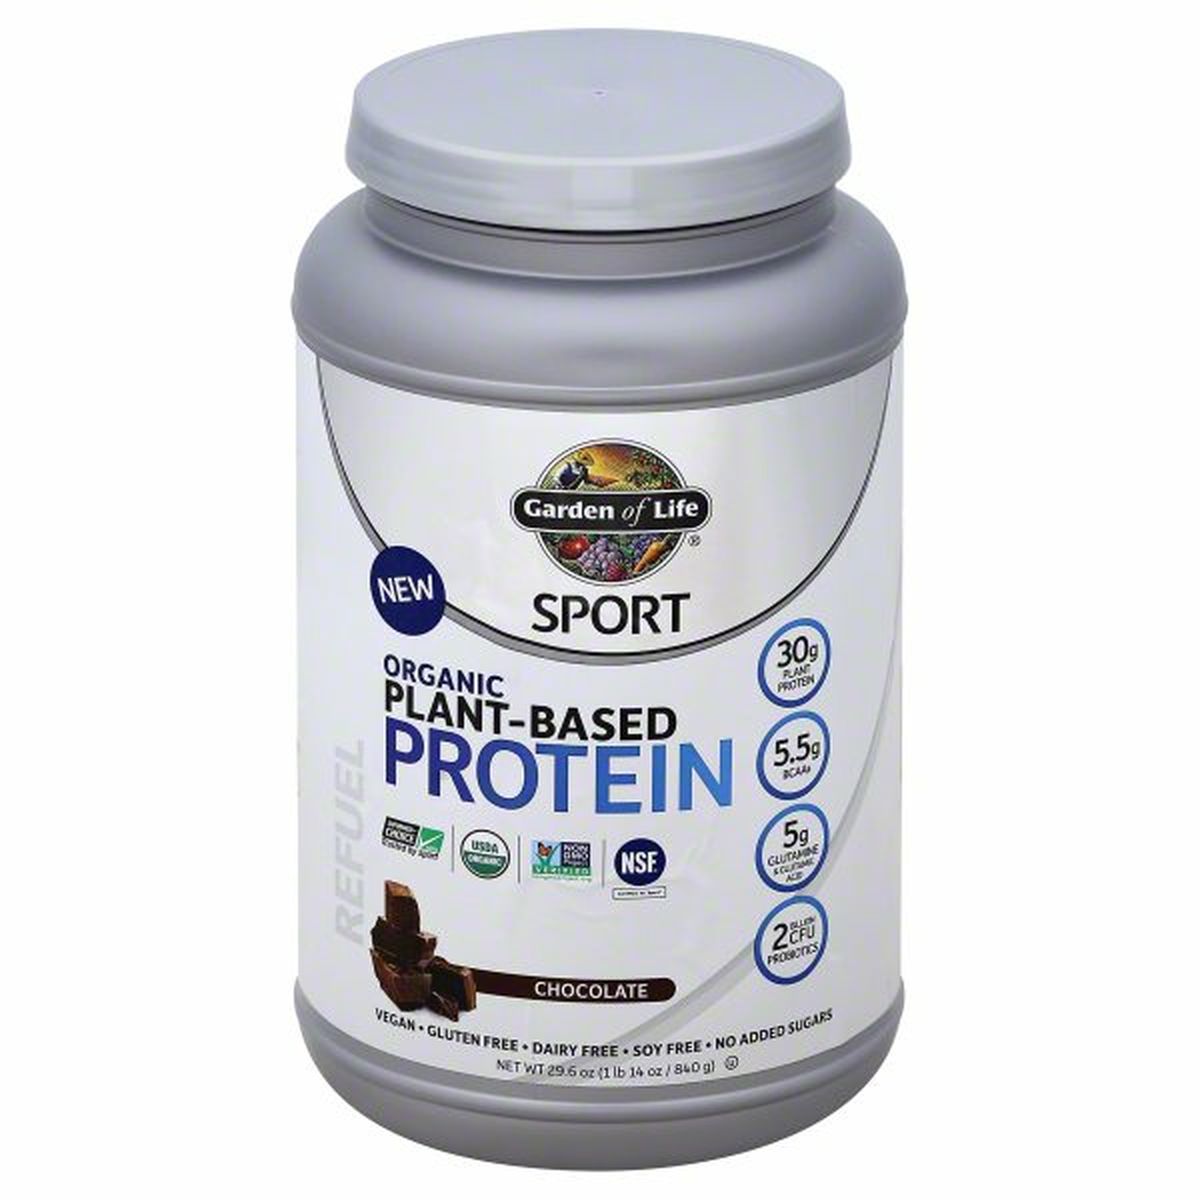 Calories in Garden of Life Sport Protein, Plant-Based, Organic, Chocolate